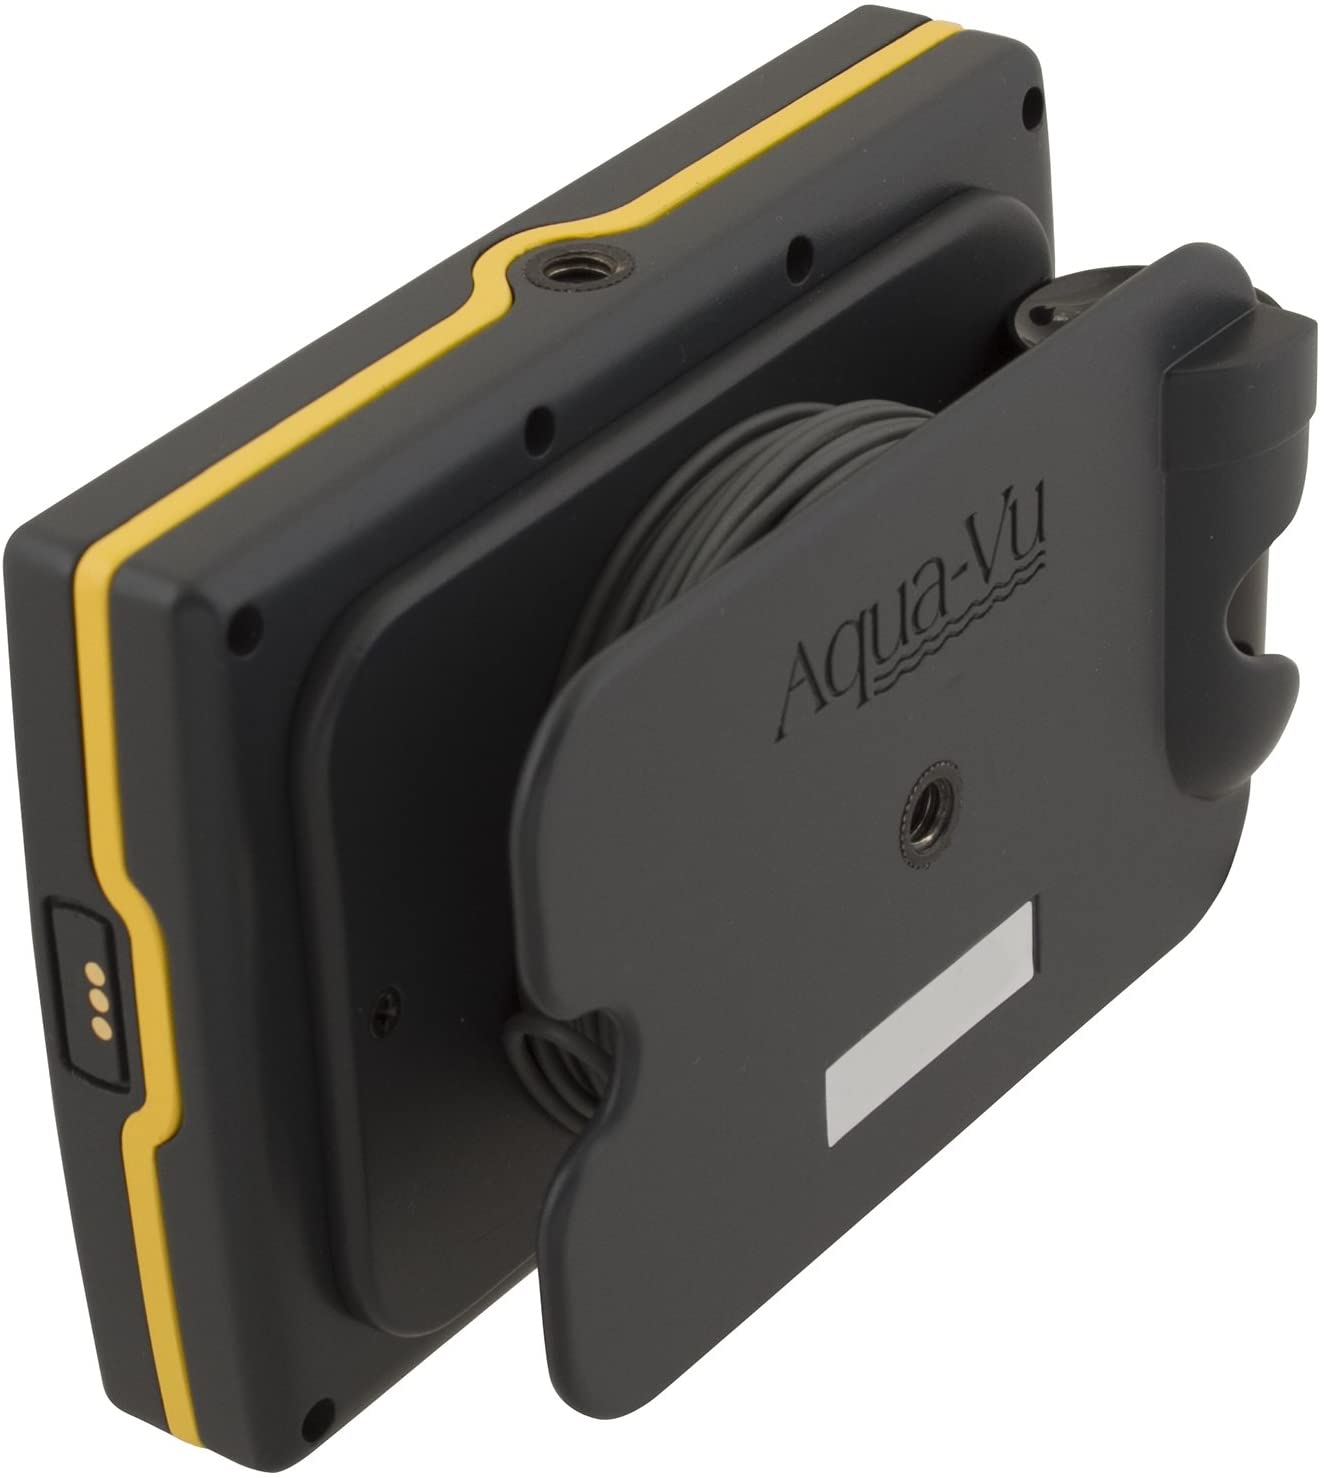 Aqua-Vu Micro Stealth Underwater Viewing System Combo